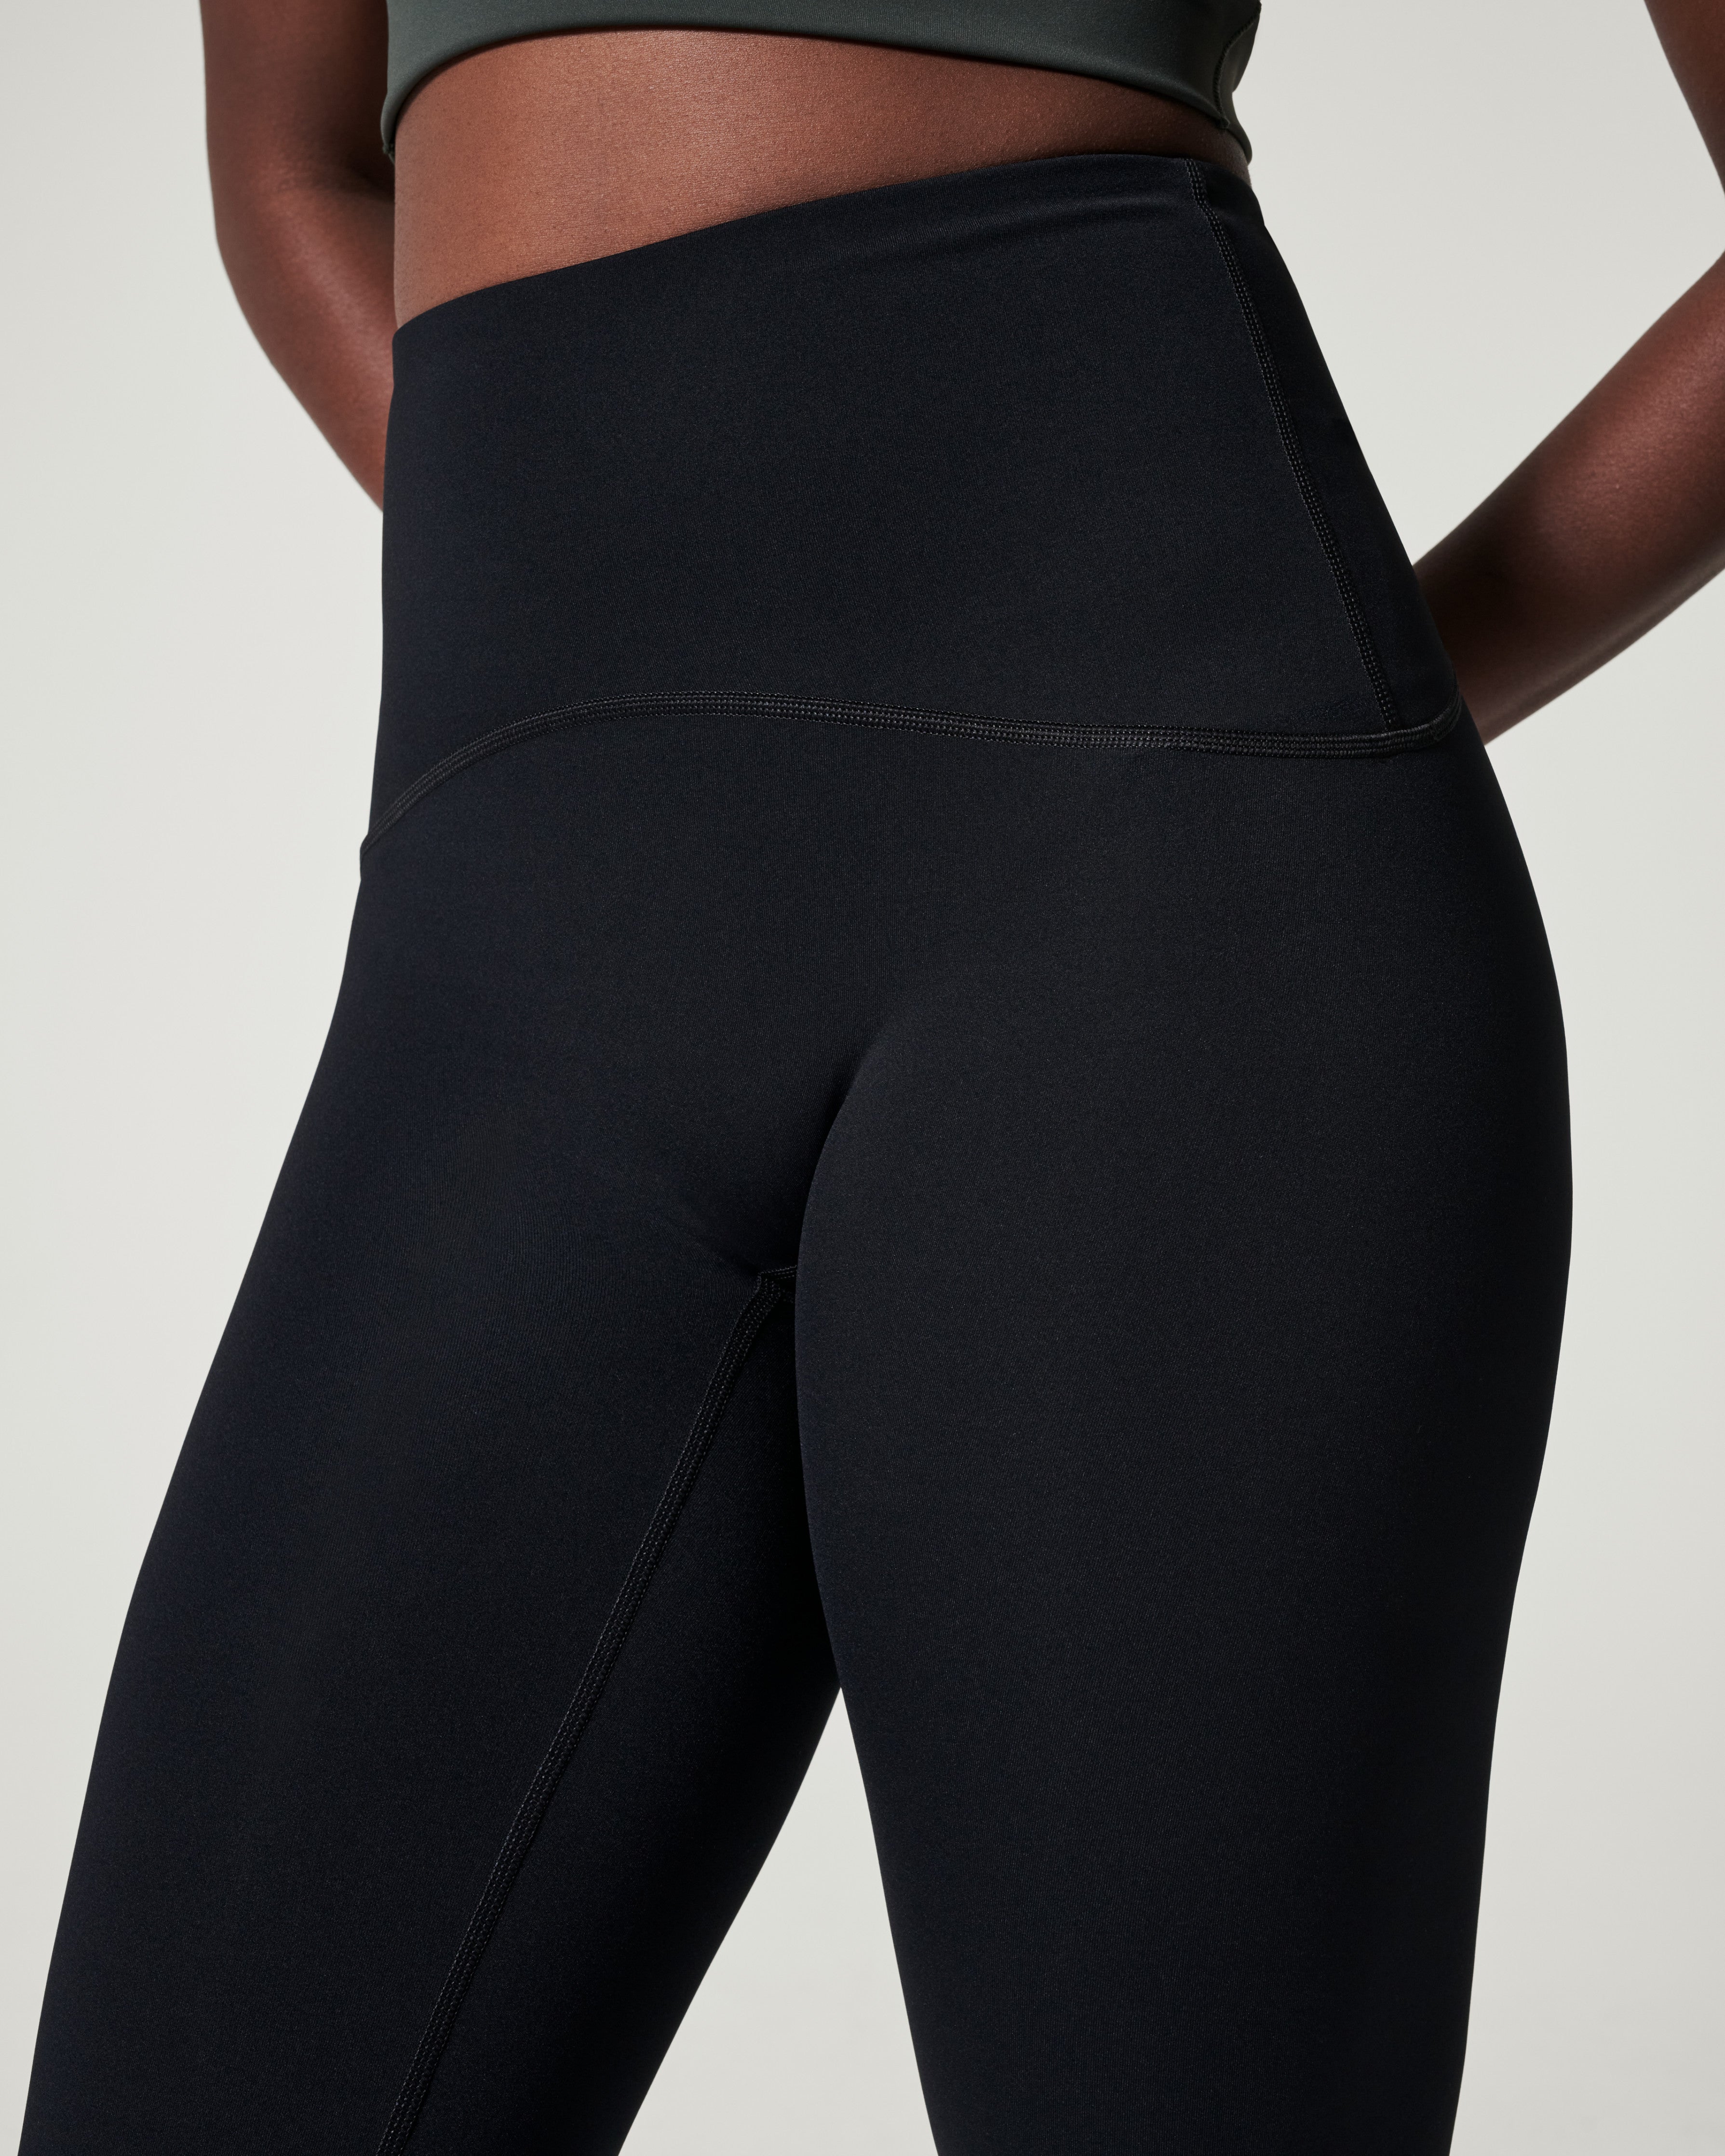 🚨HUGE Spanx Restock🚨 Air Essentials Crew, Booty Boost Leggings, Booty  Boost Yoga Pants, Dolman Sweatshirt, and many other arrivals�